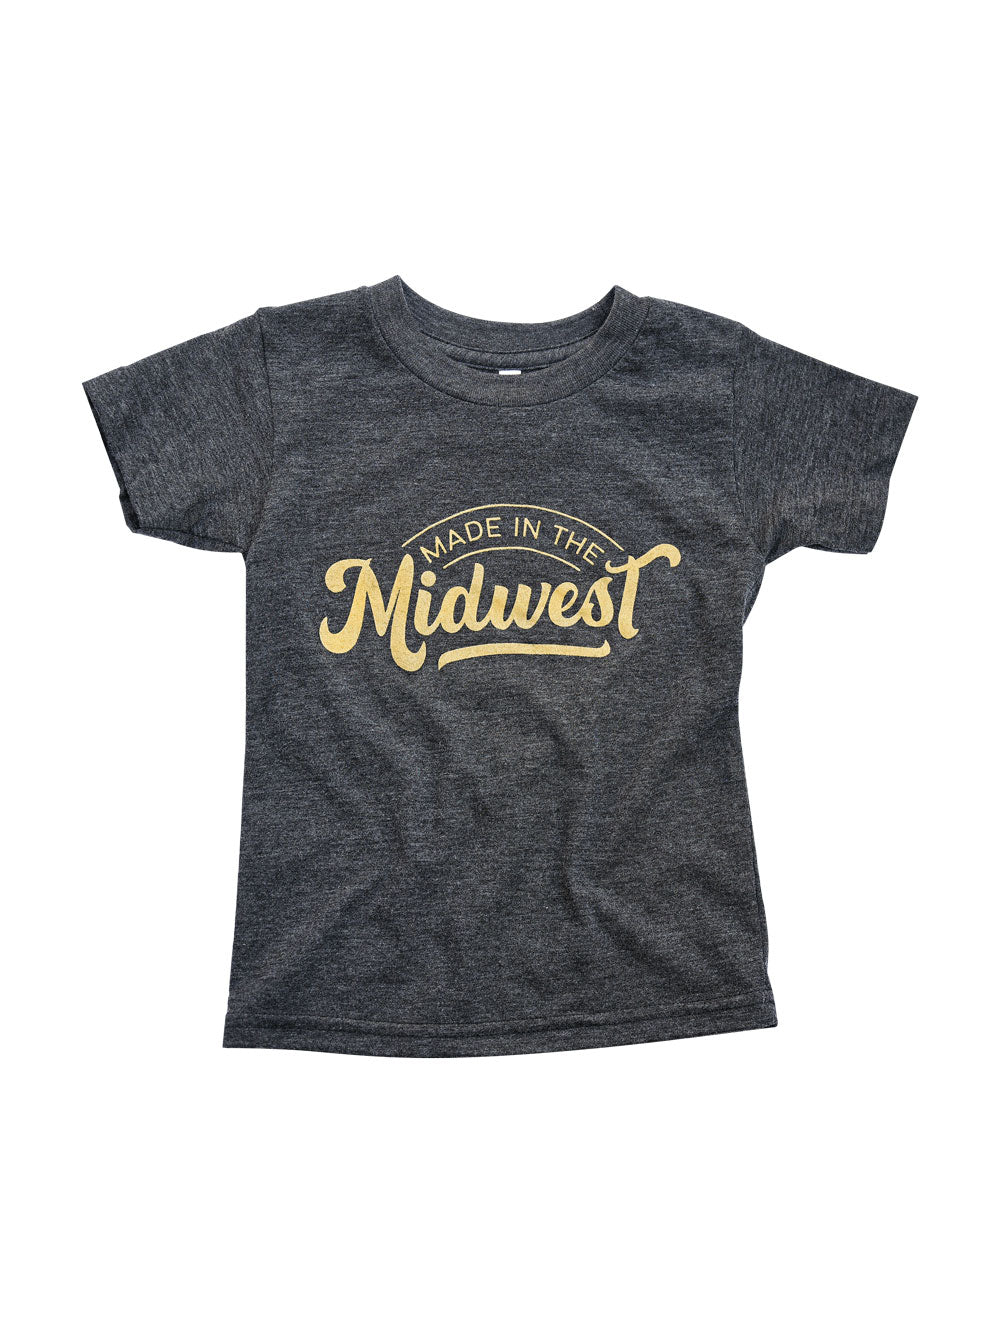 Made in the Midwest black heather kids t-shirt